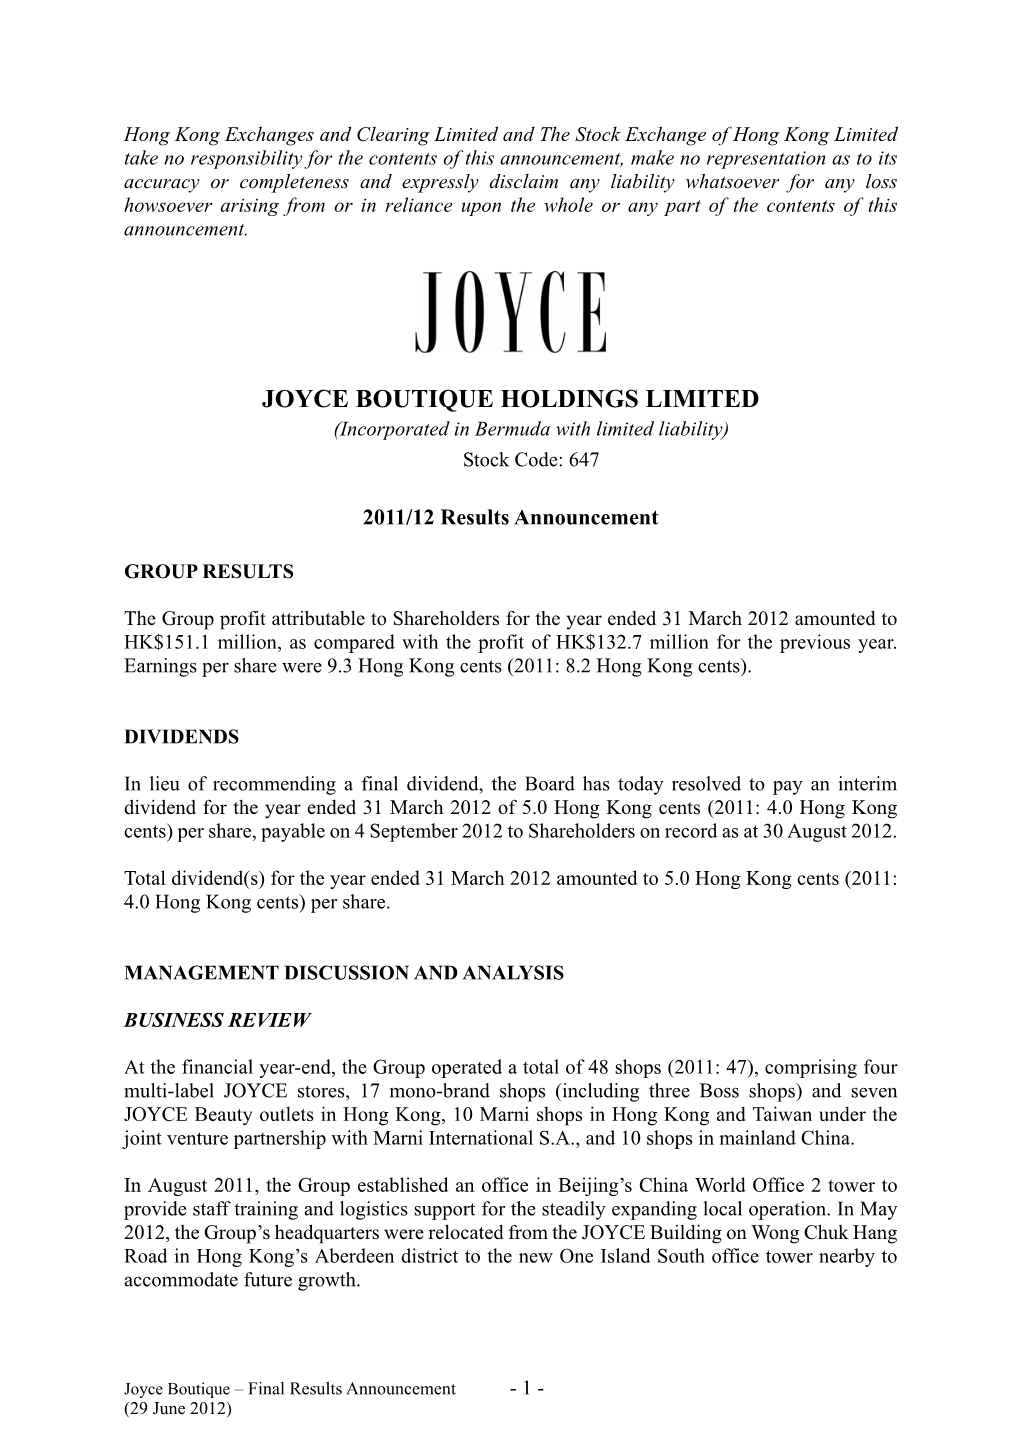 JOYCE BOUTIQUE HOLDINGS LIMITED (Incorporated in Bermuda with Limited Liability) Stock Code: 647